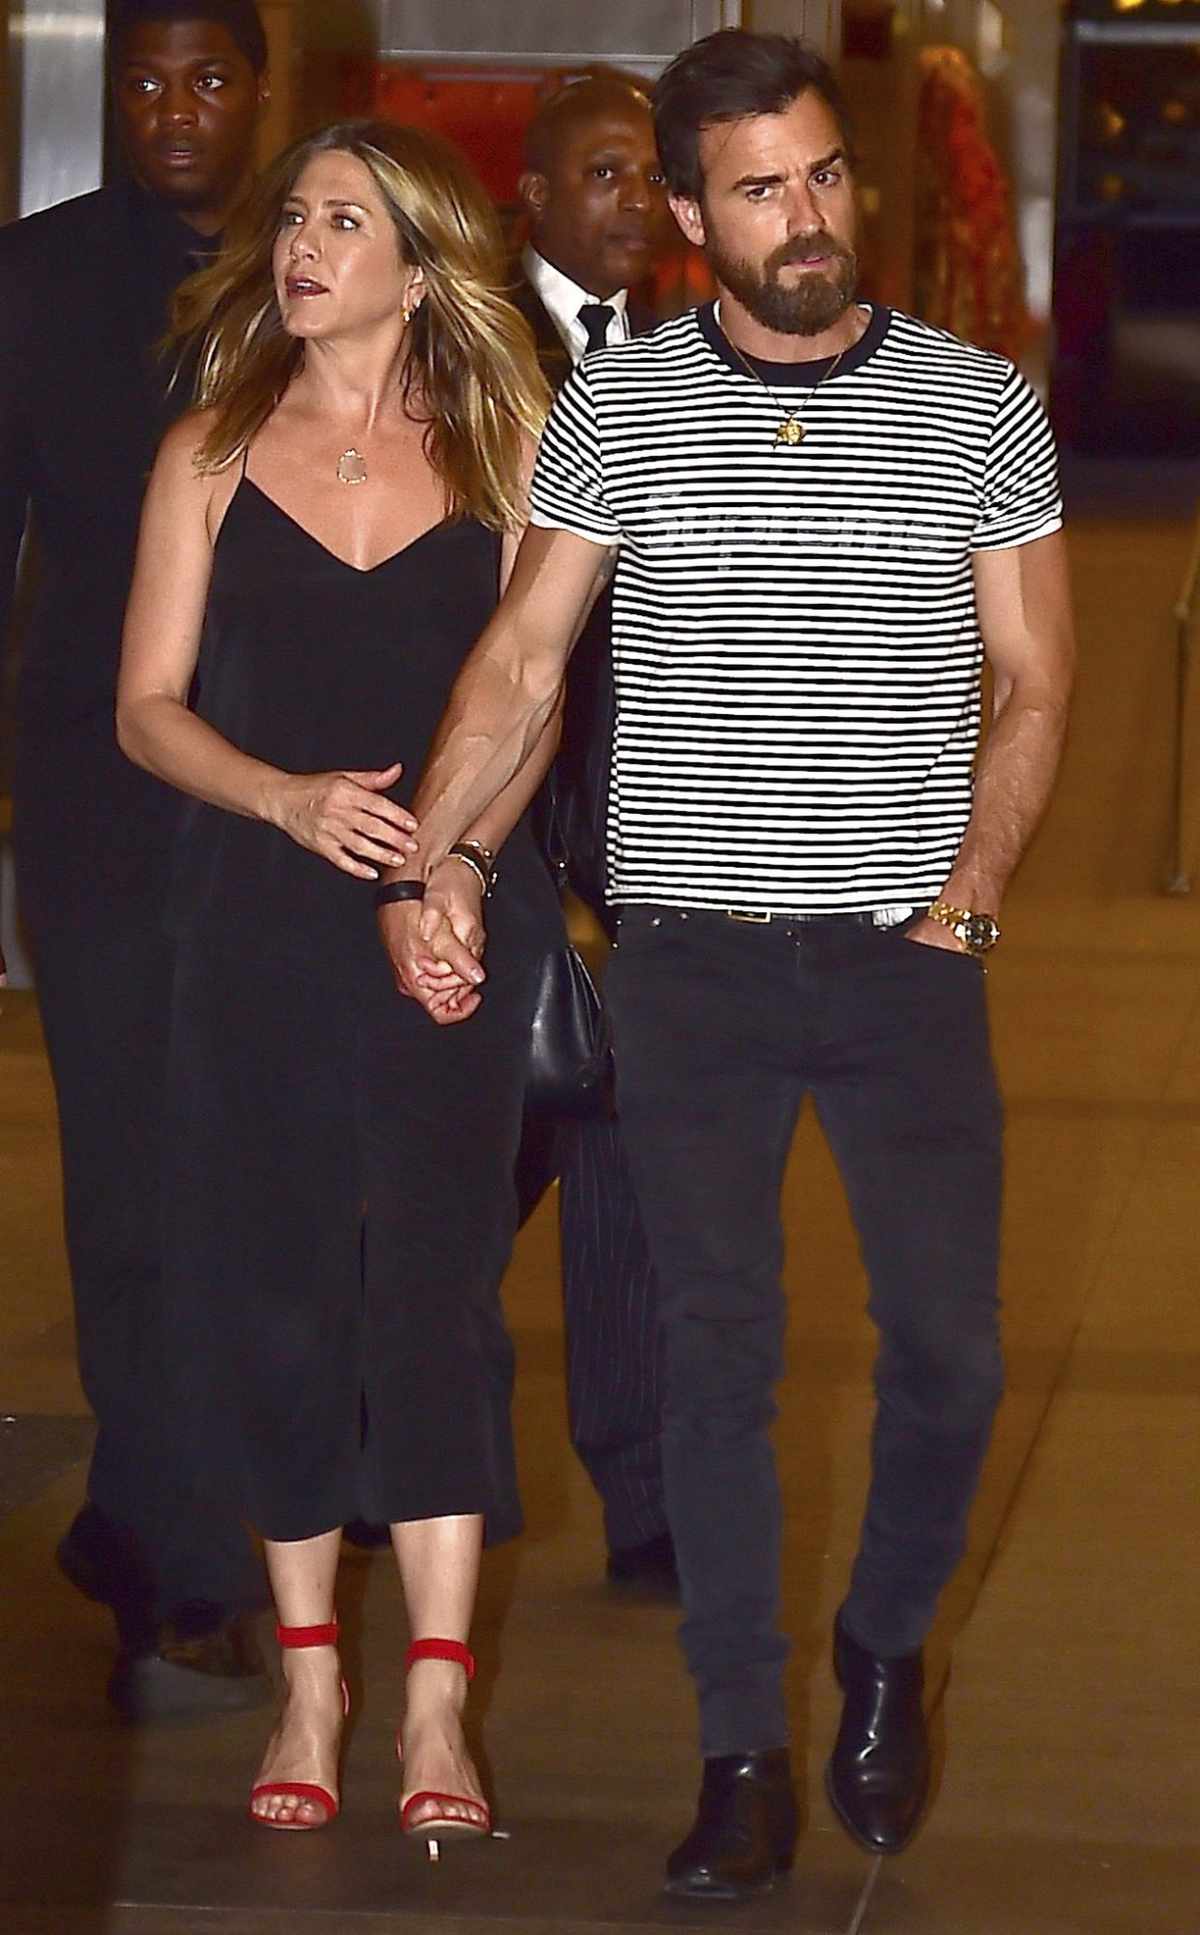 NEW YORK, NY - JUNE 19:  Jennifer Aniston and Justin Theroux are seen in Midtown on June 19, 2016 in New York City.  (Photo by Alo Ceballos/GC Images) GC Images  591542687 541524262